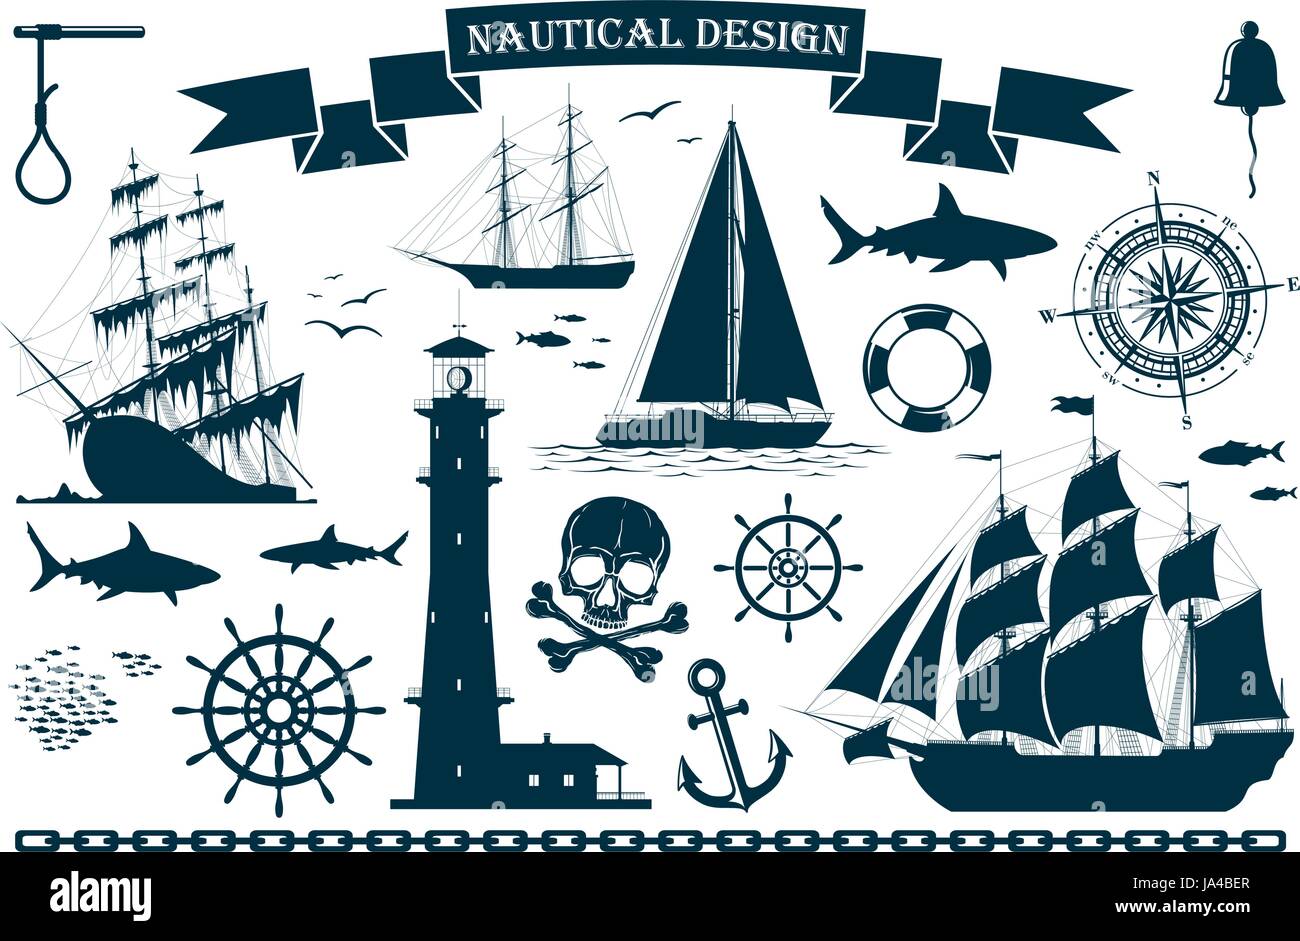 Set of sailing ships with nautical design elements Stock Vector